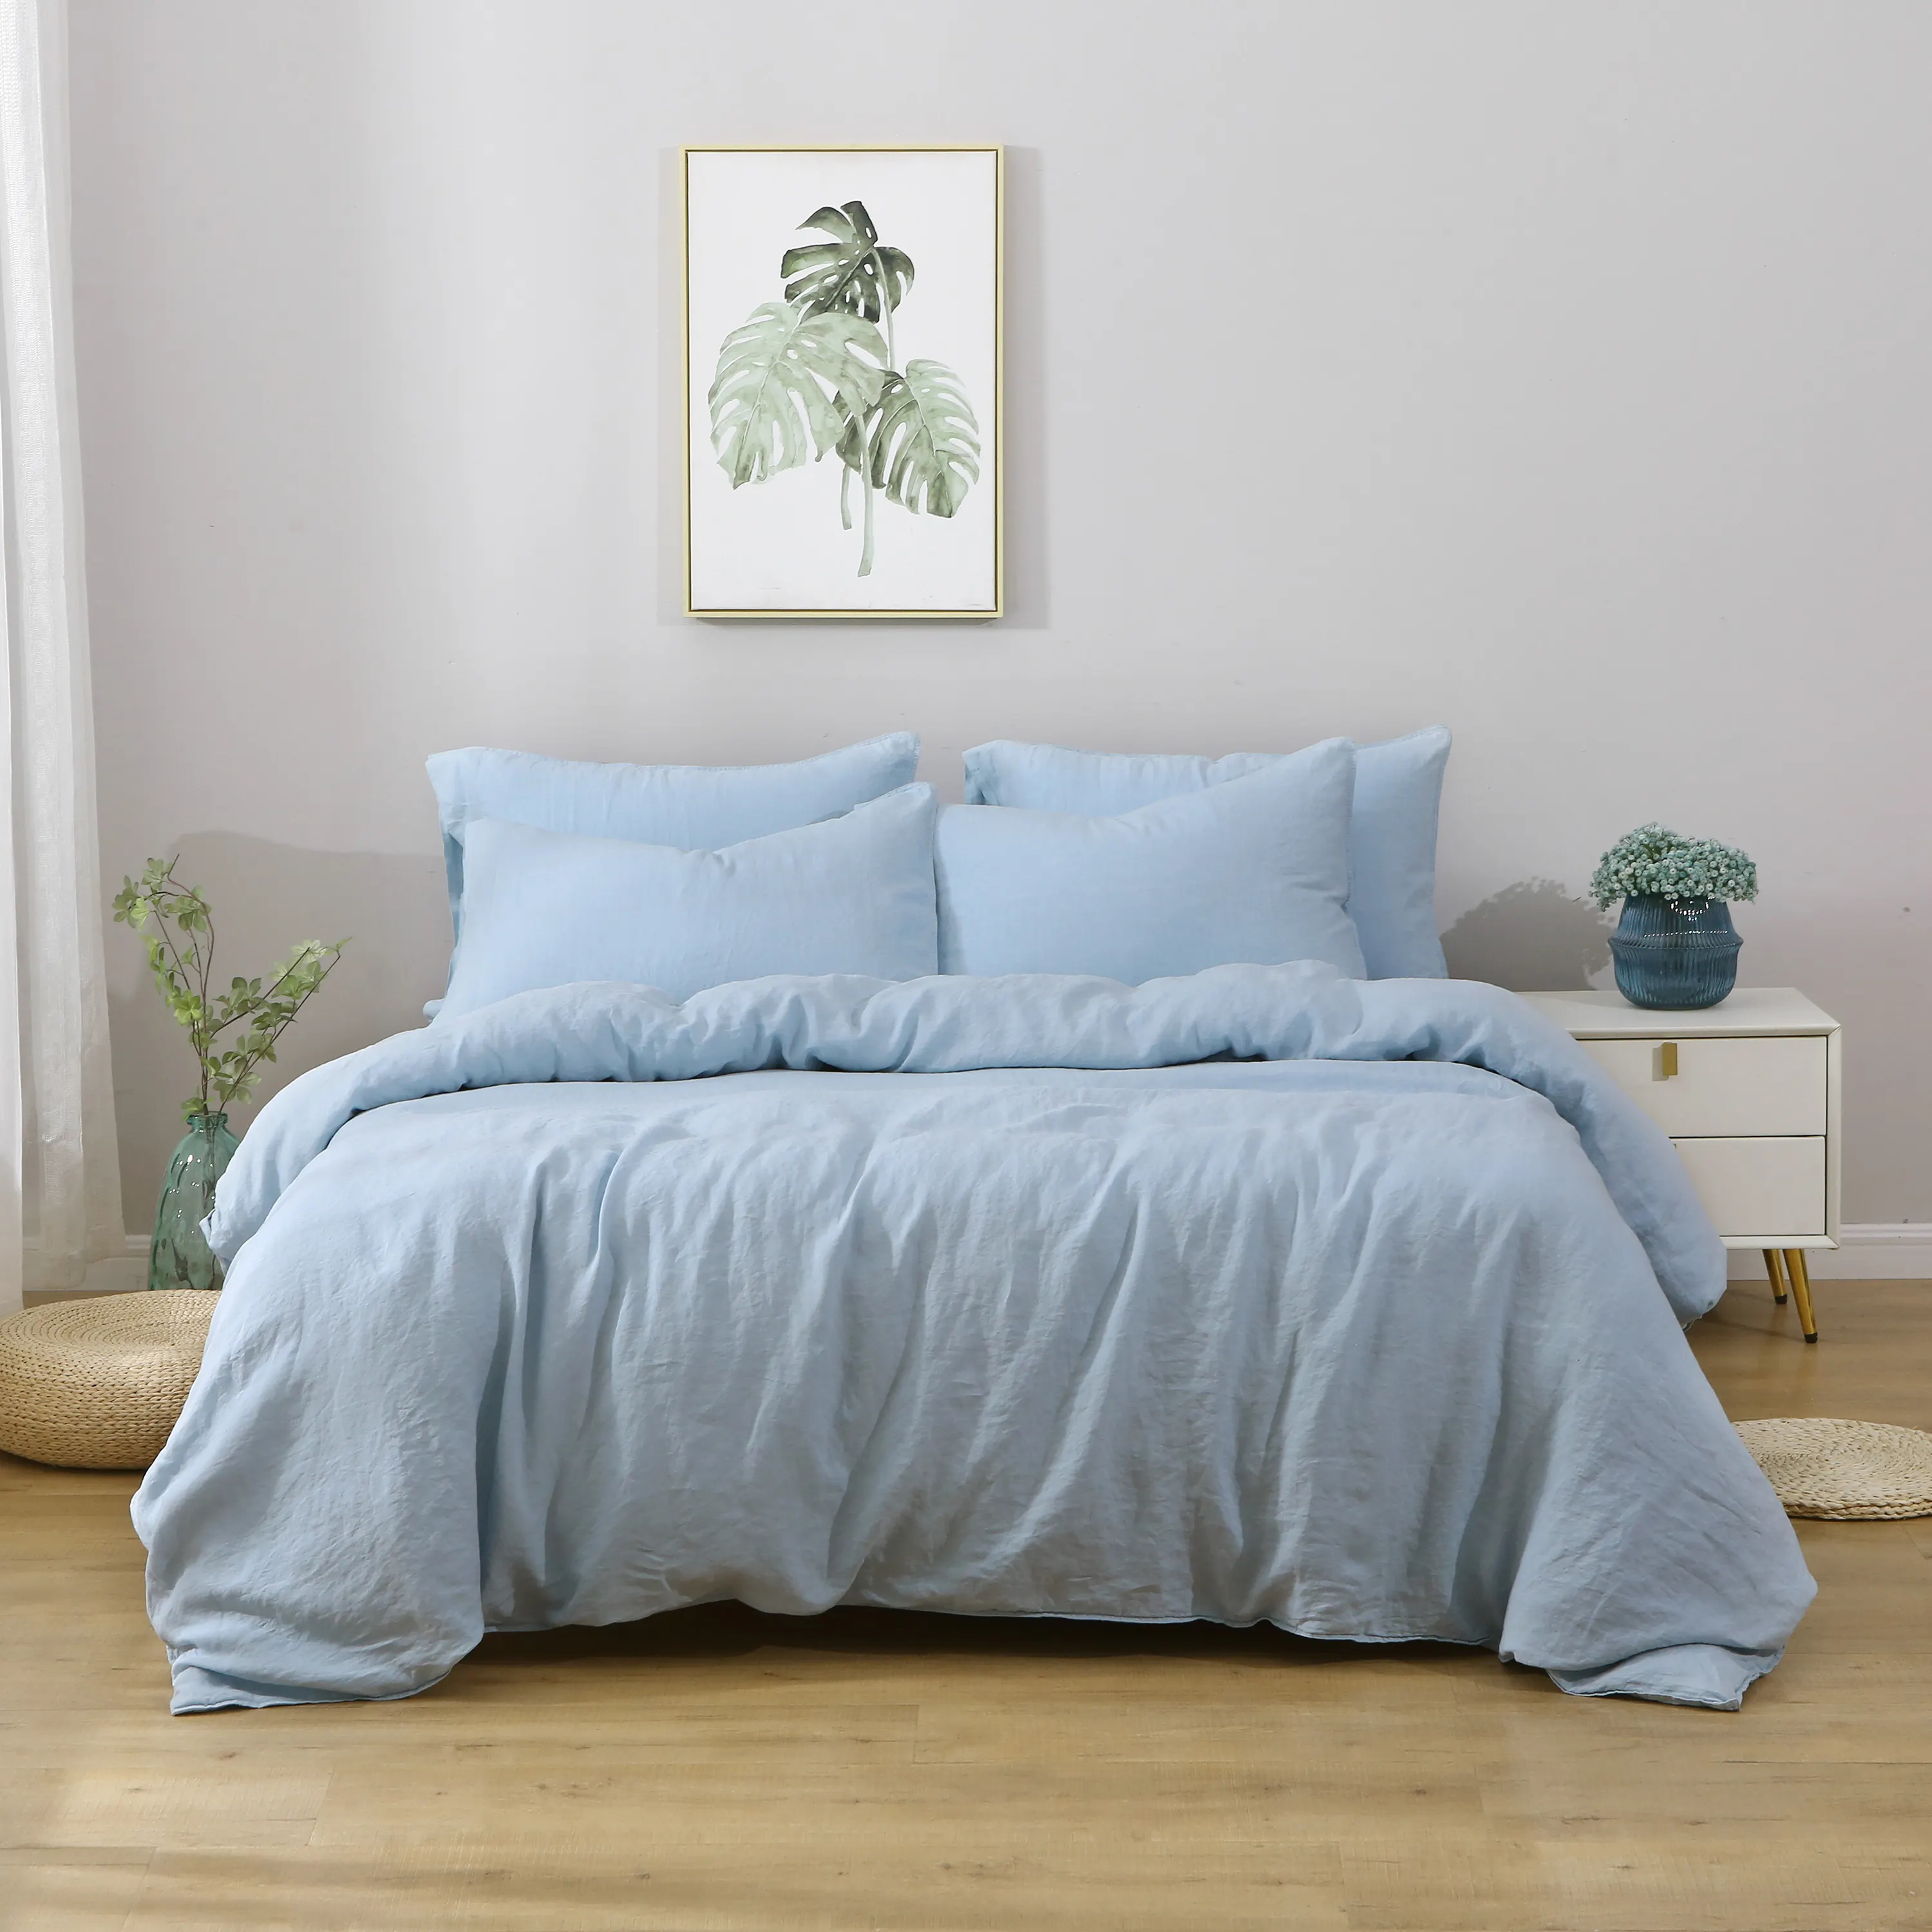 Customized Pure Linen Duvet Cover Set Stone Washed